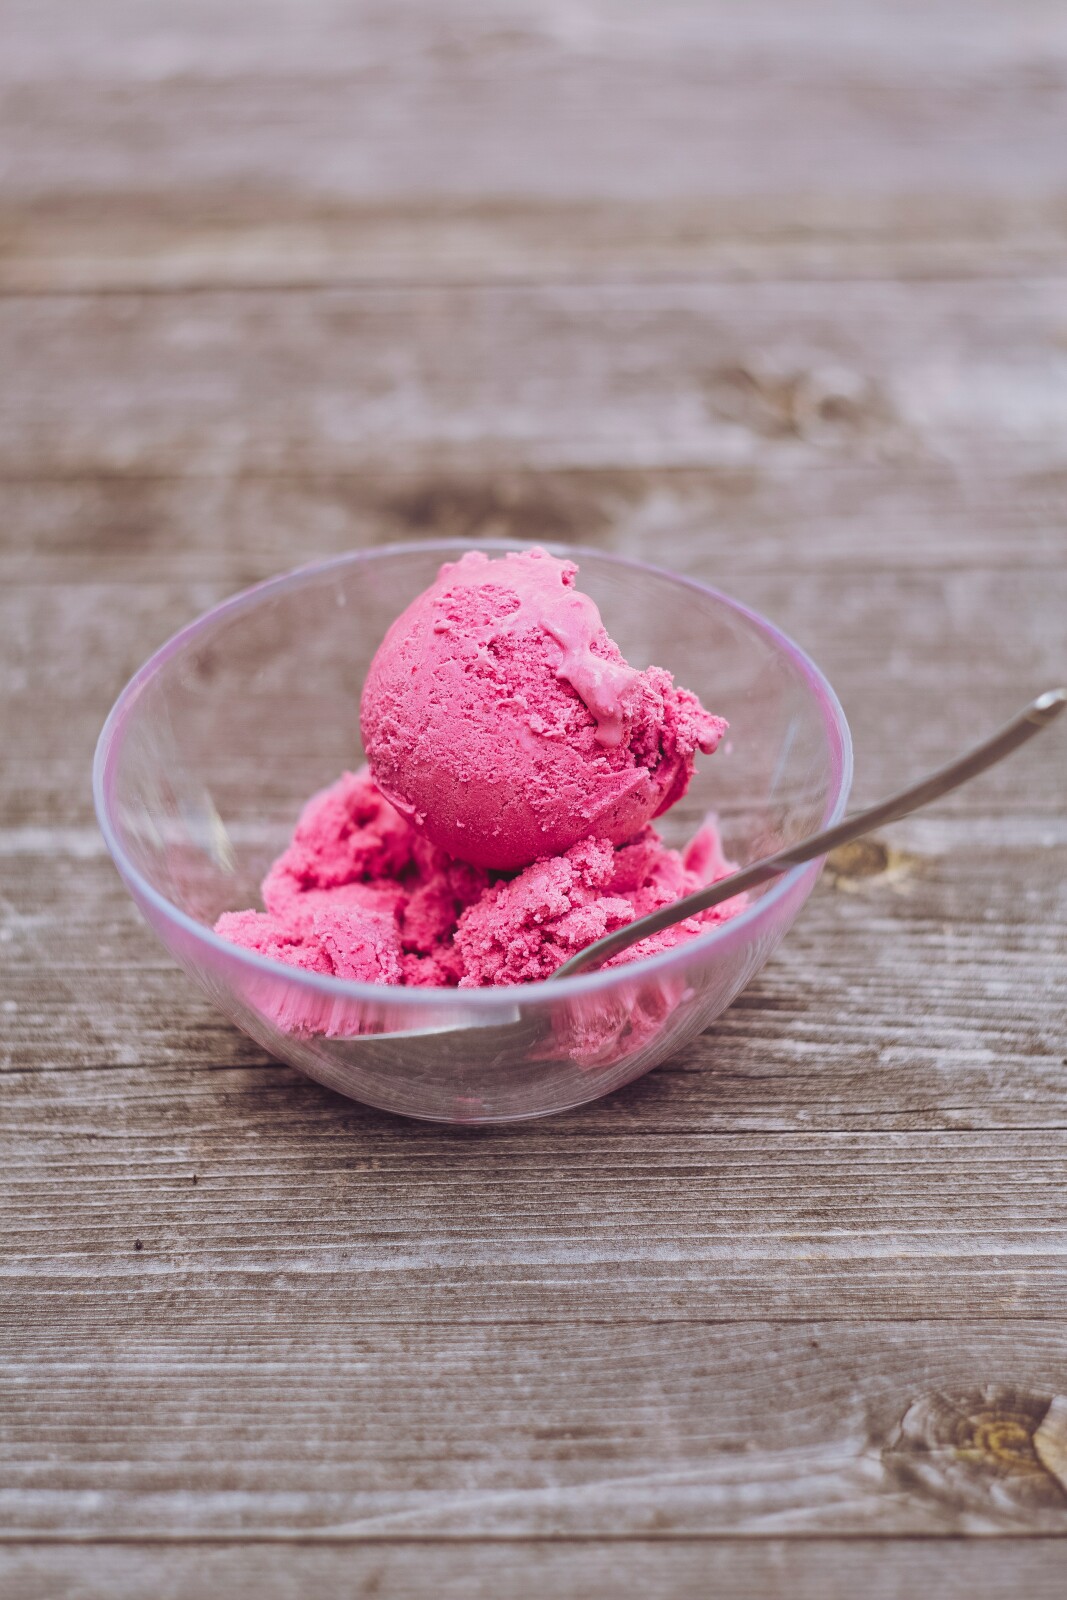 I Can't Believe It's Not Dairy! Part 1 - Strawberry Ice Cream